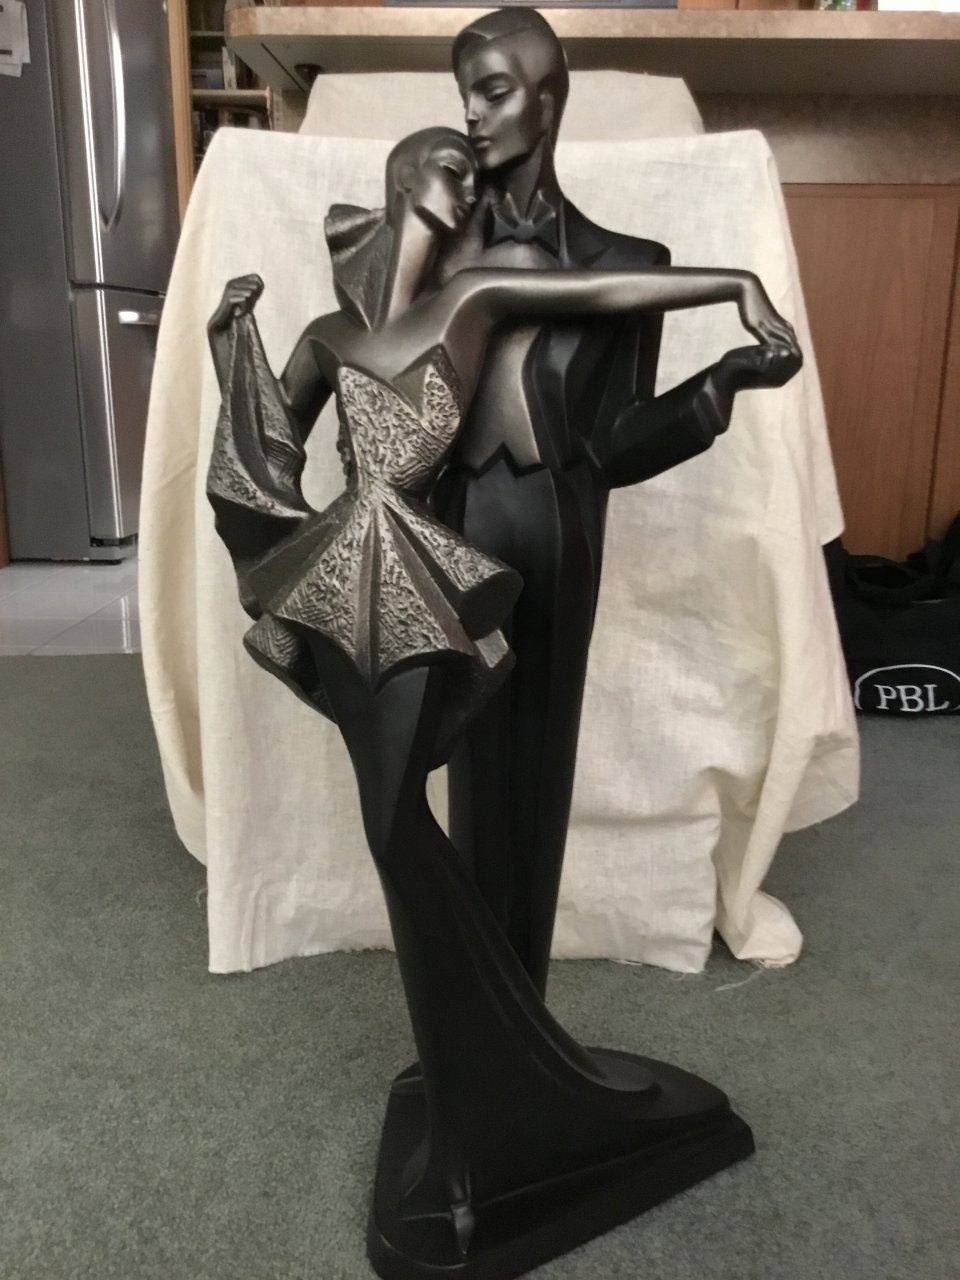 I Have An Austin Sculpture "High Society" By Danel In Great Condition